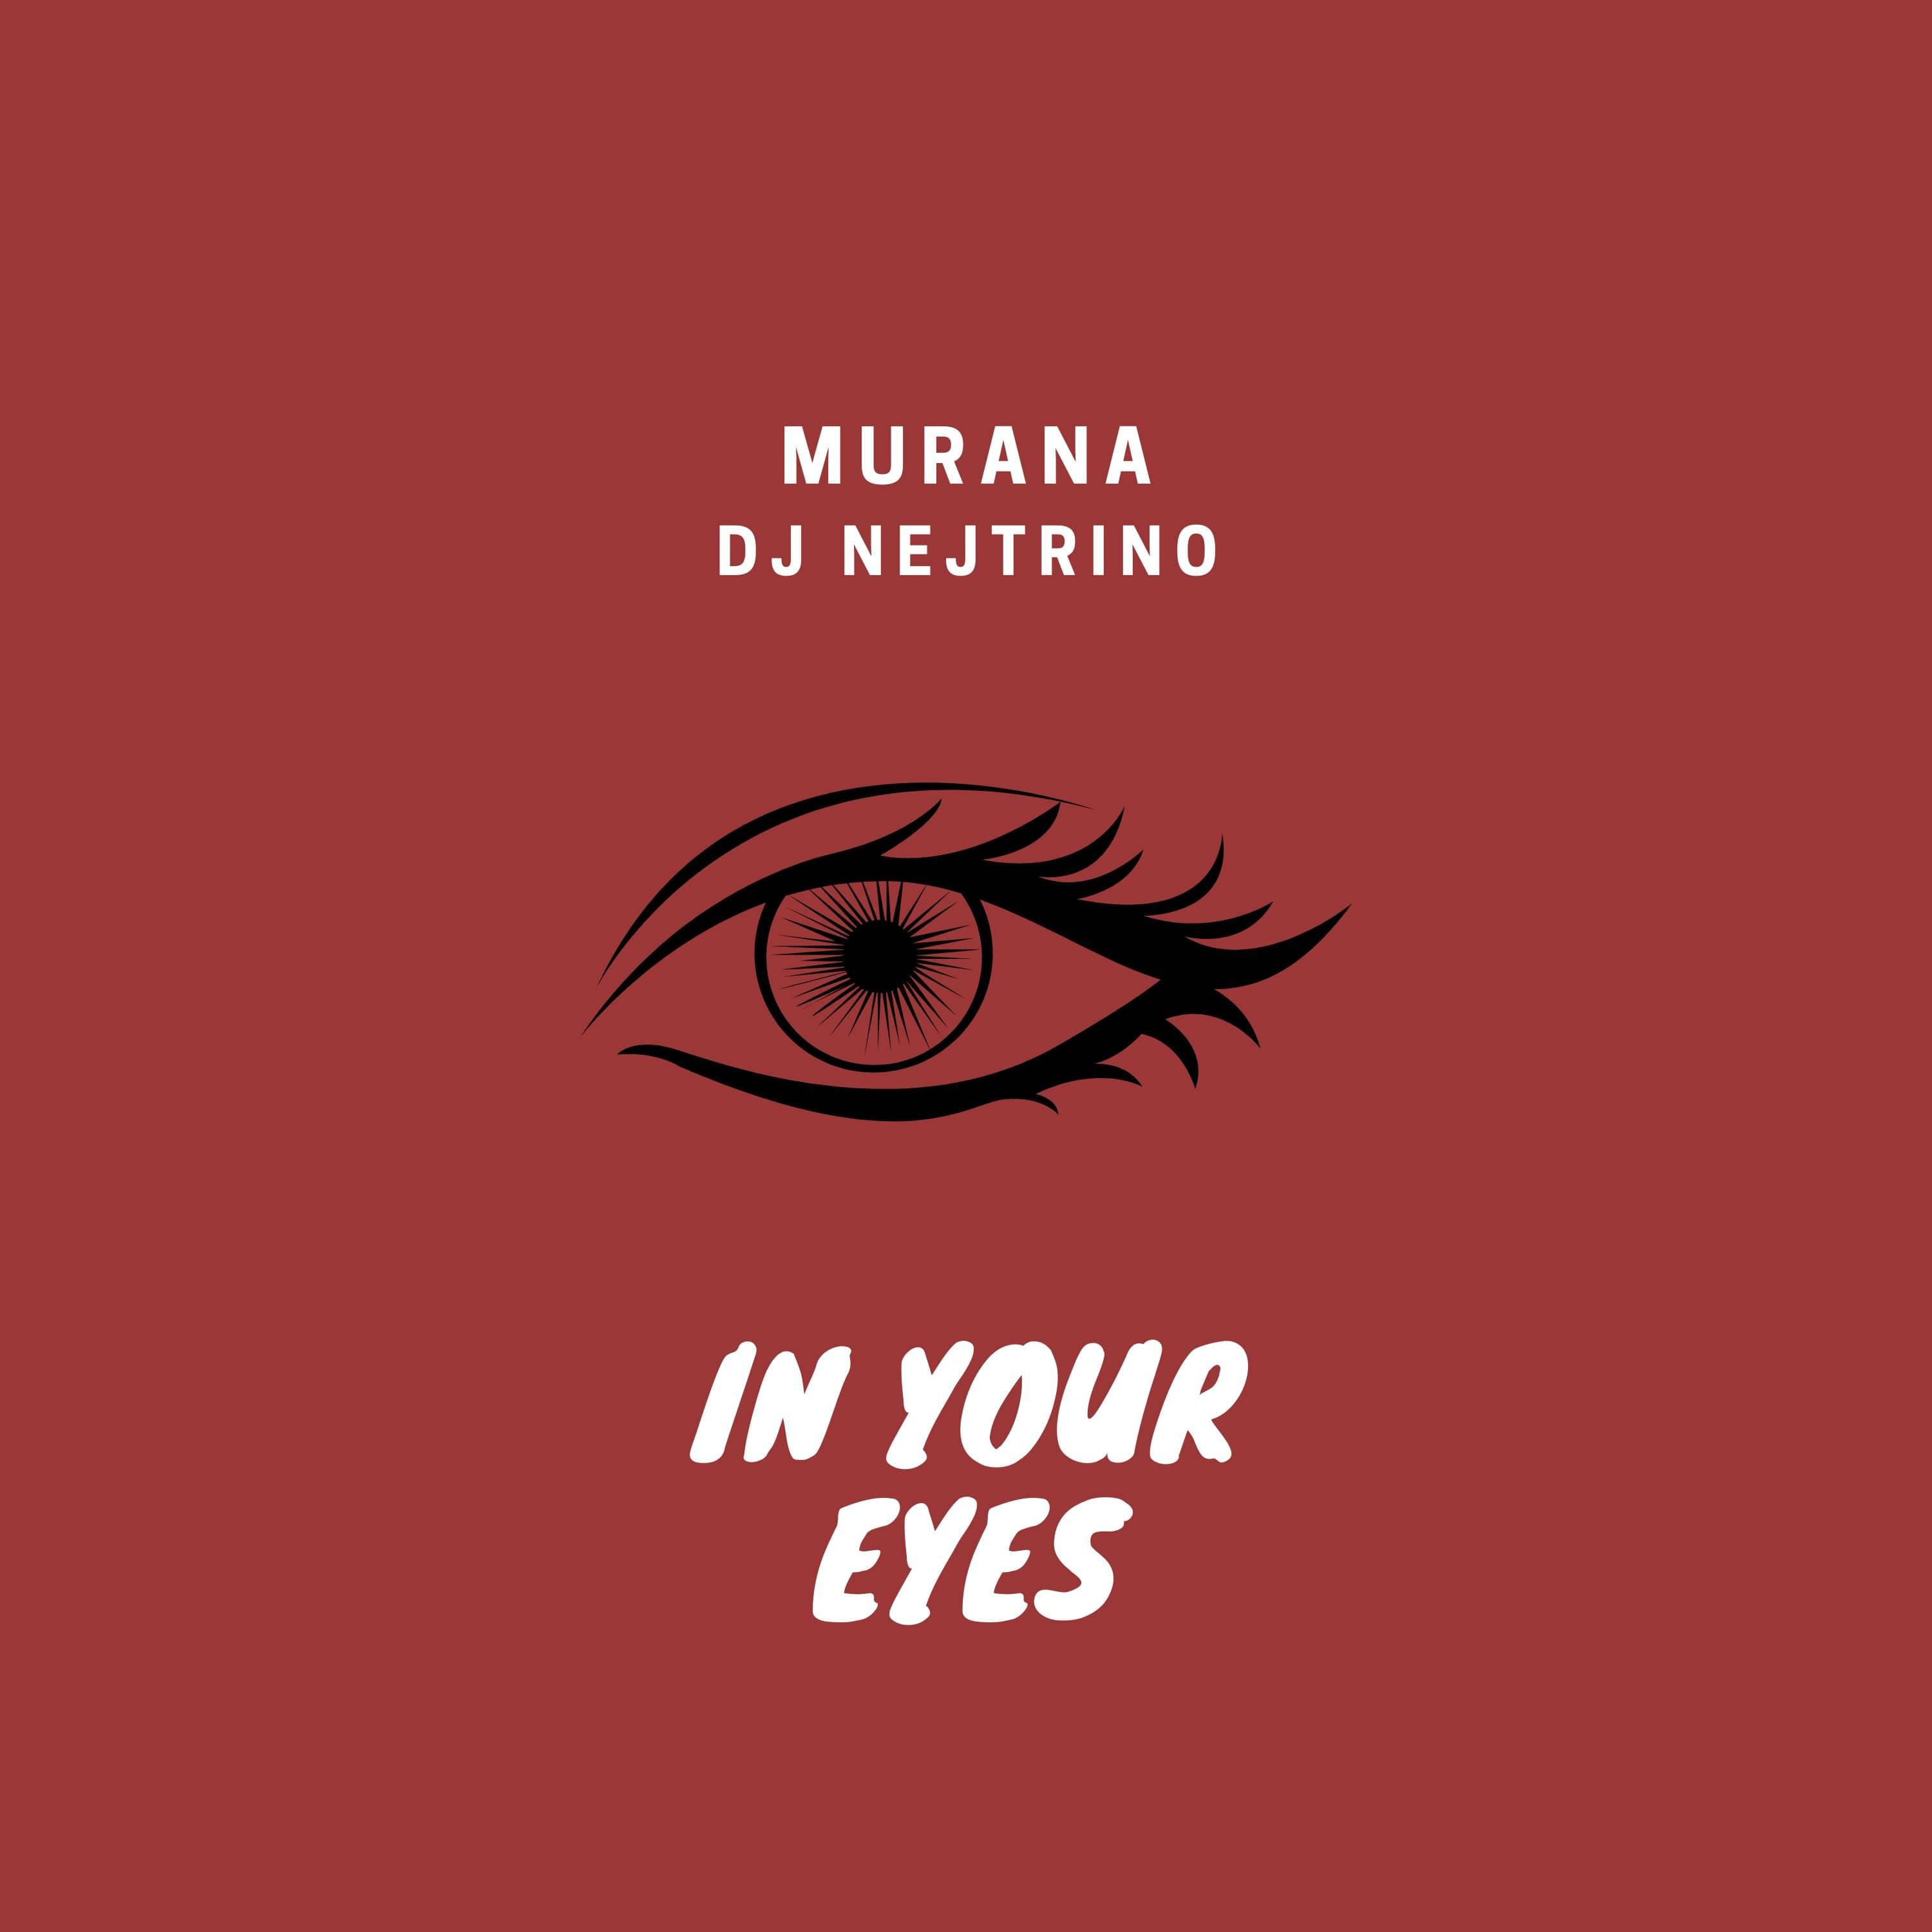 MURANA - In Your Eyes (Cover)